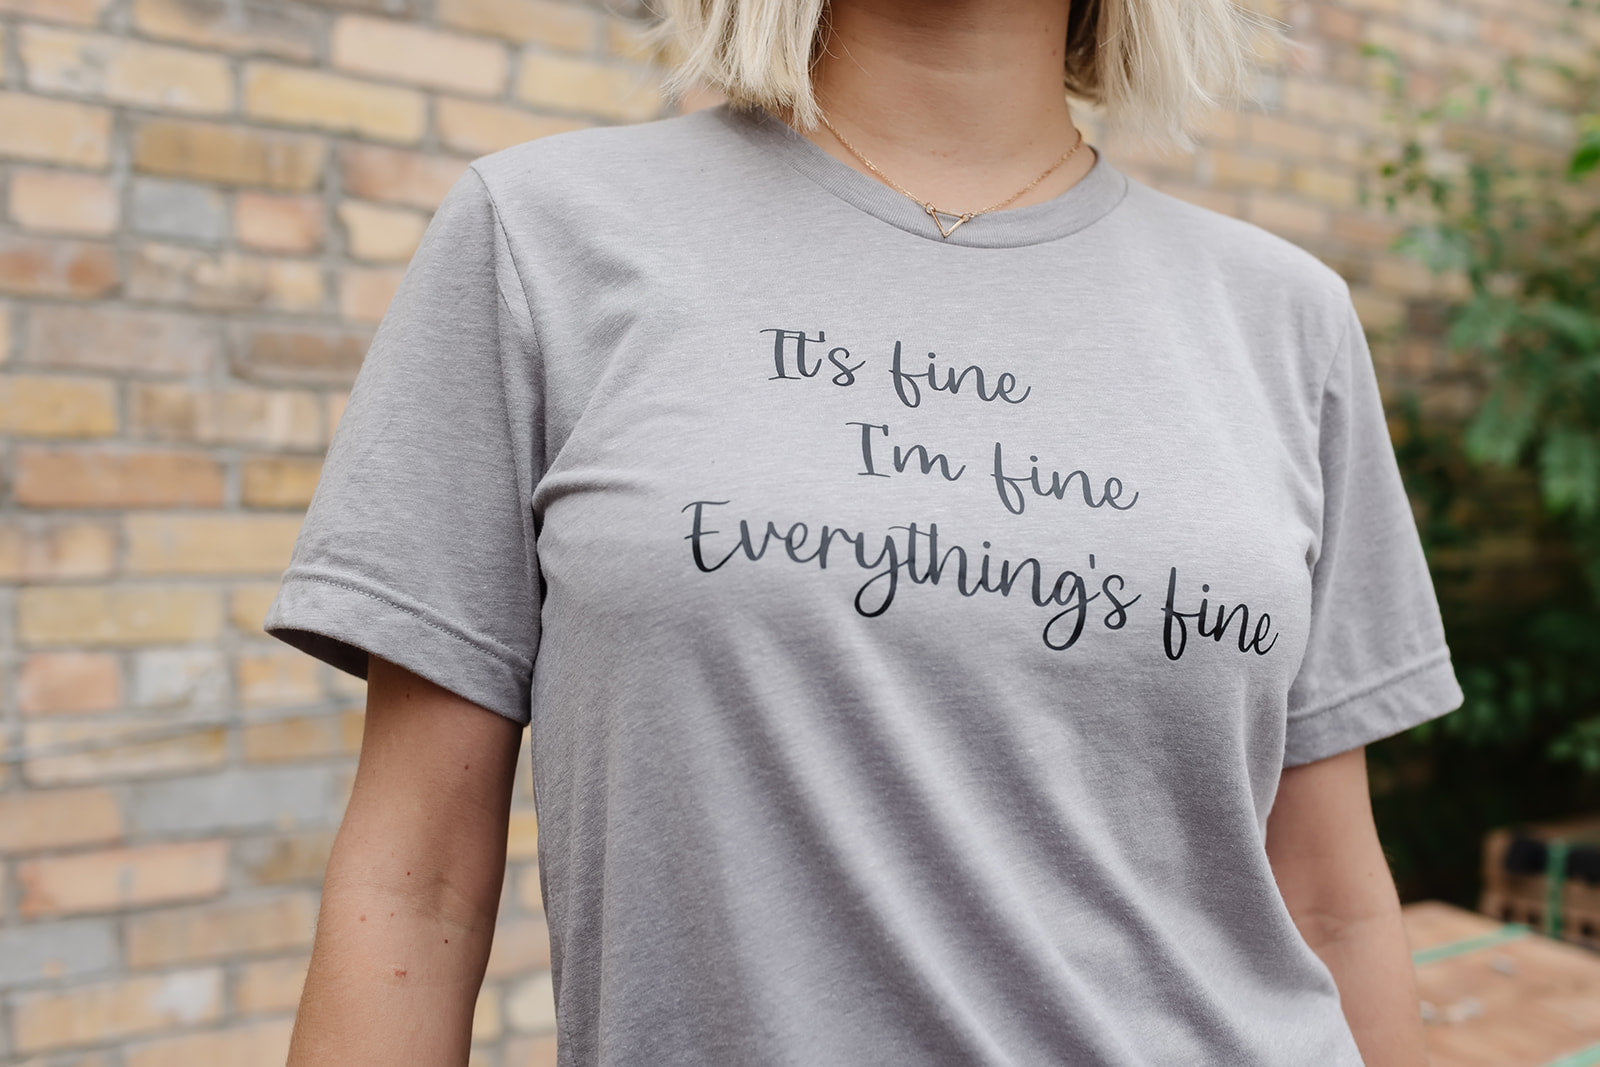 IT'S FINE   I'M FINE   EVERYTHING'S FINE   grey shirt- Unisex size adult graphic tees